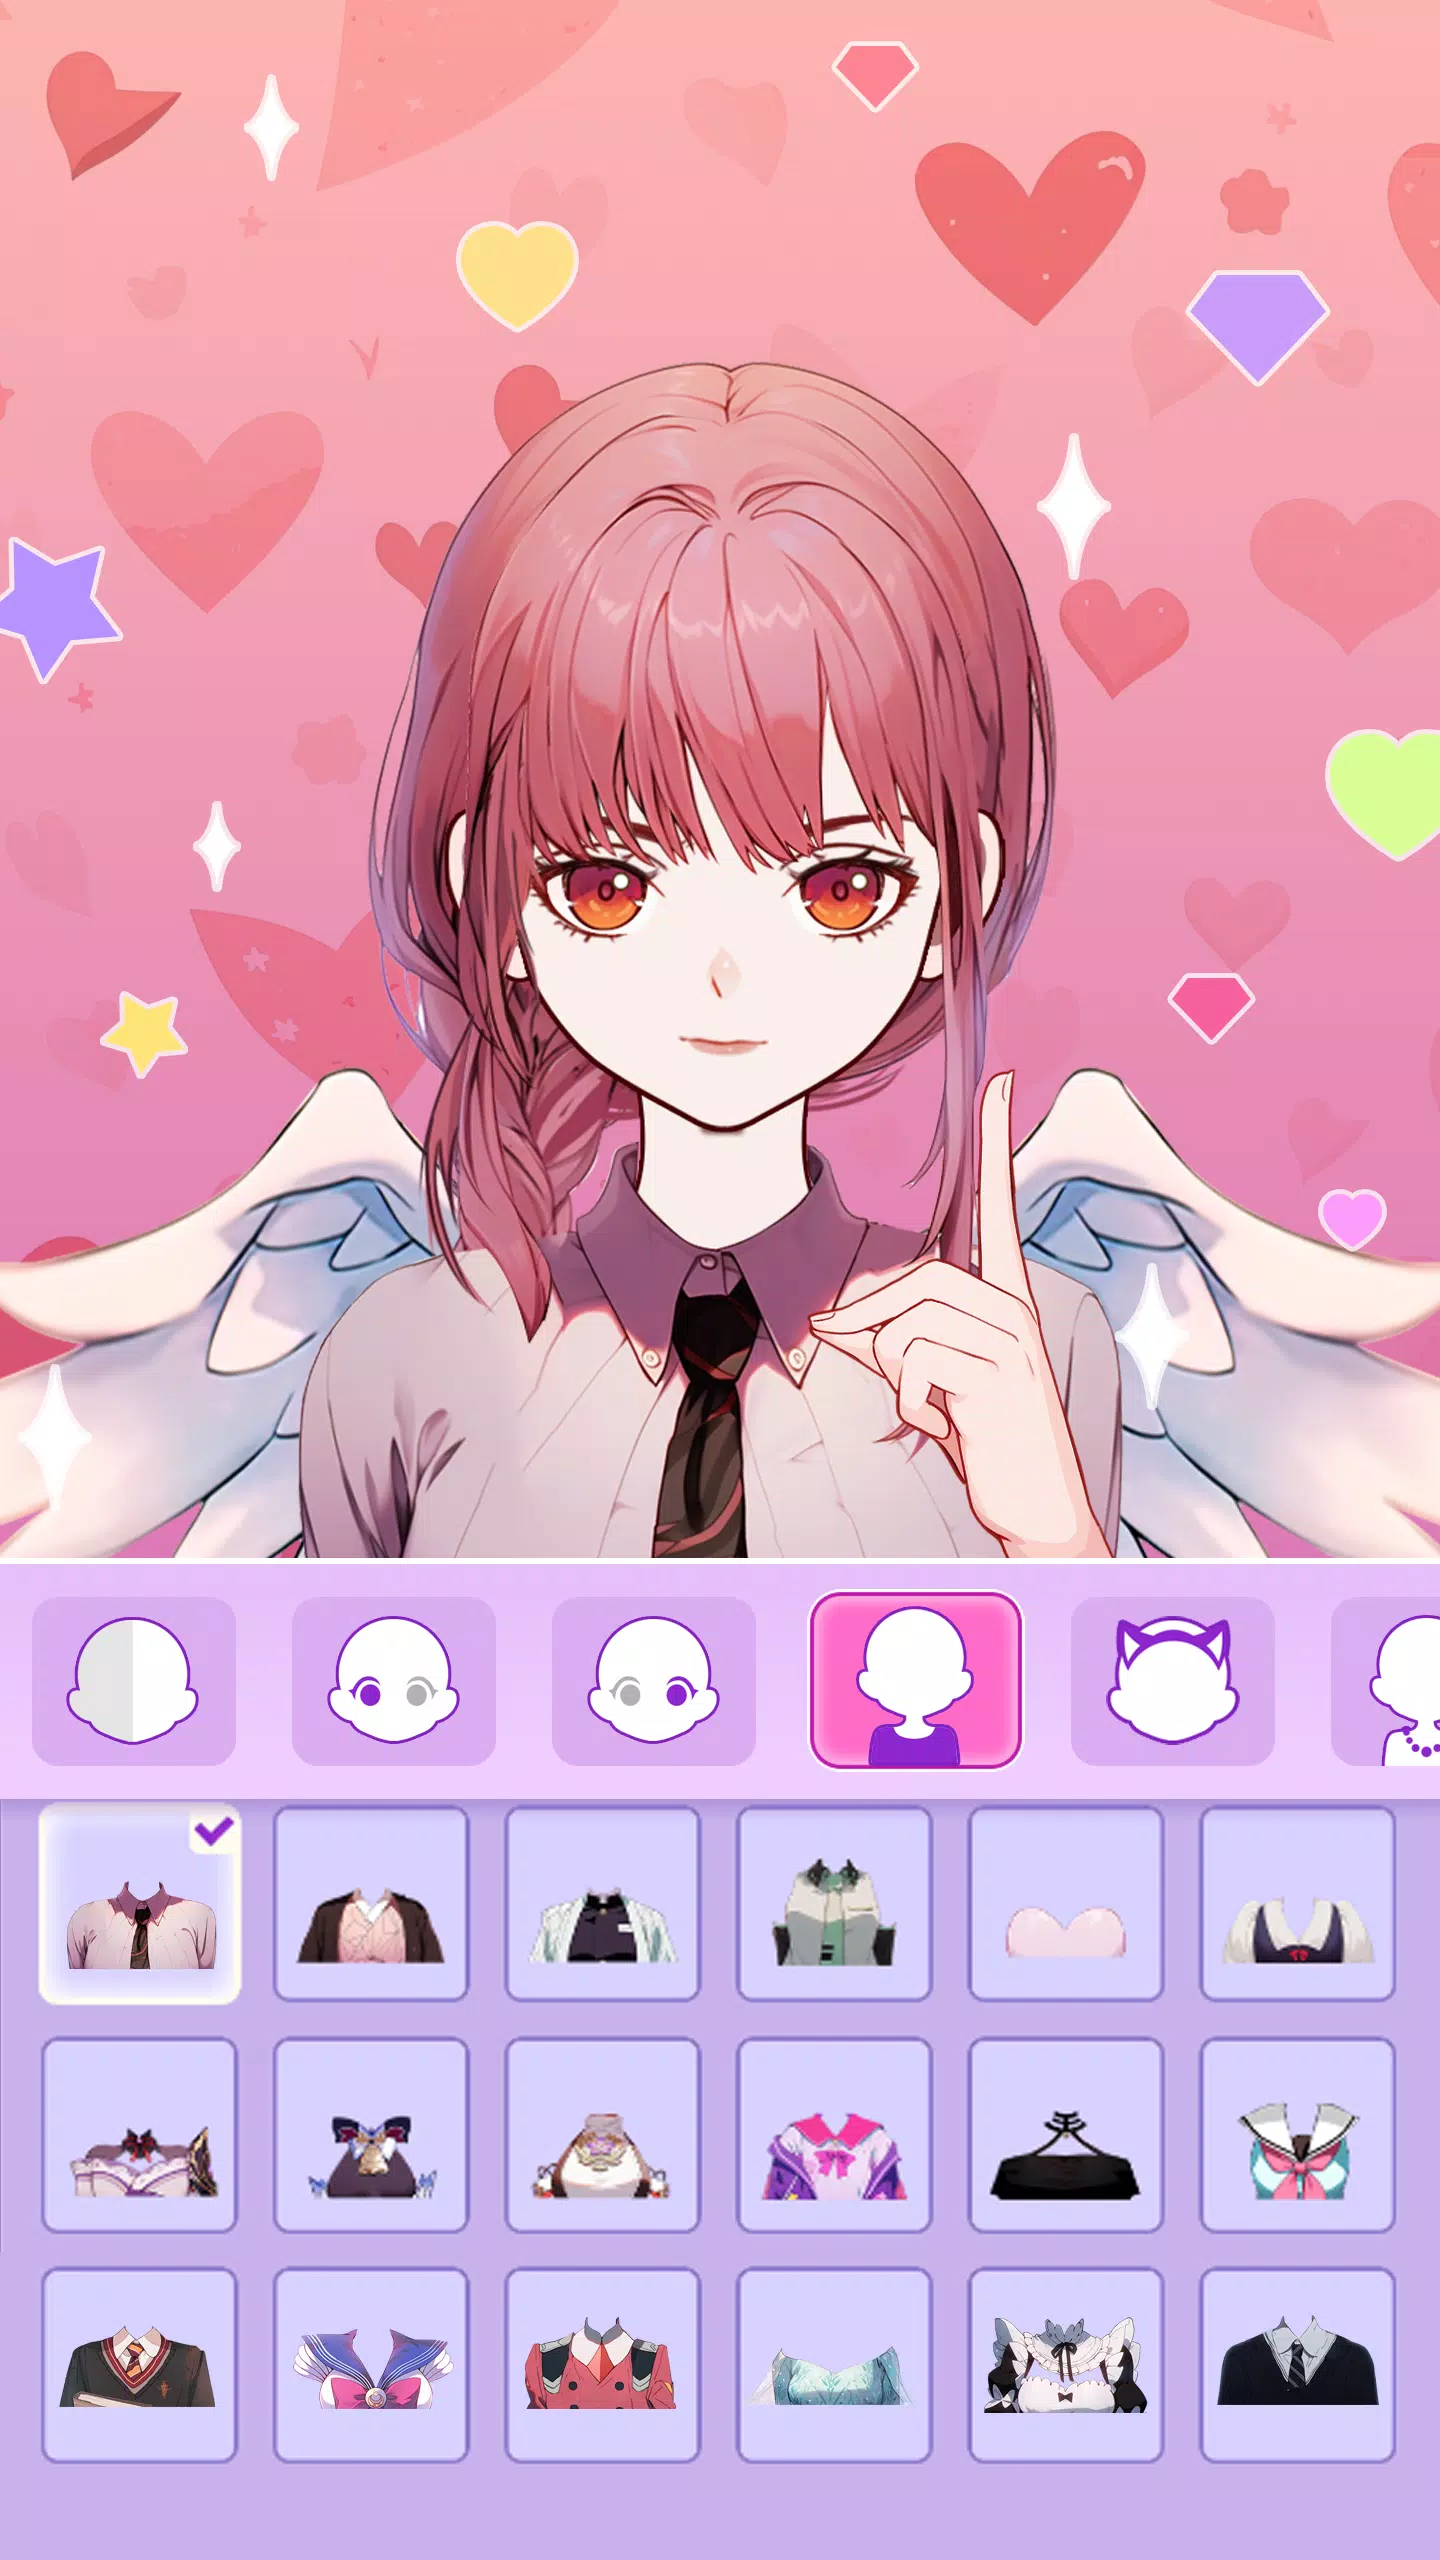 Anime Doll Avatar Maker Game for iPhone - Download